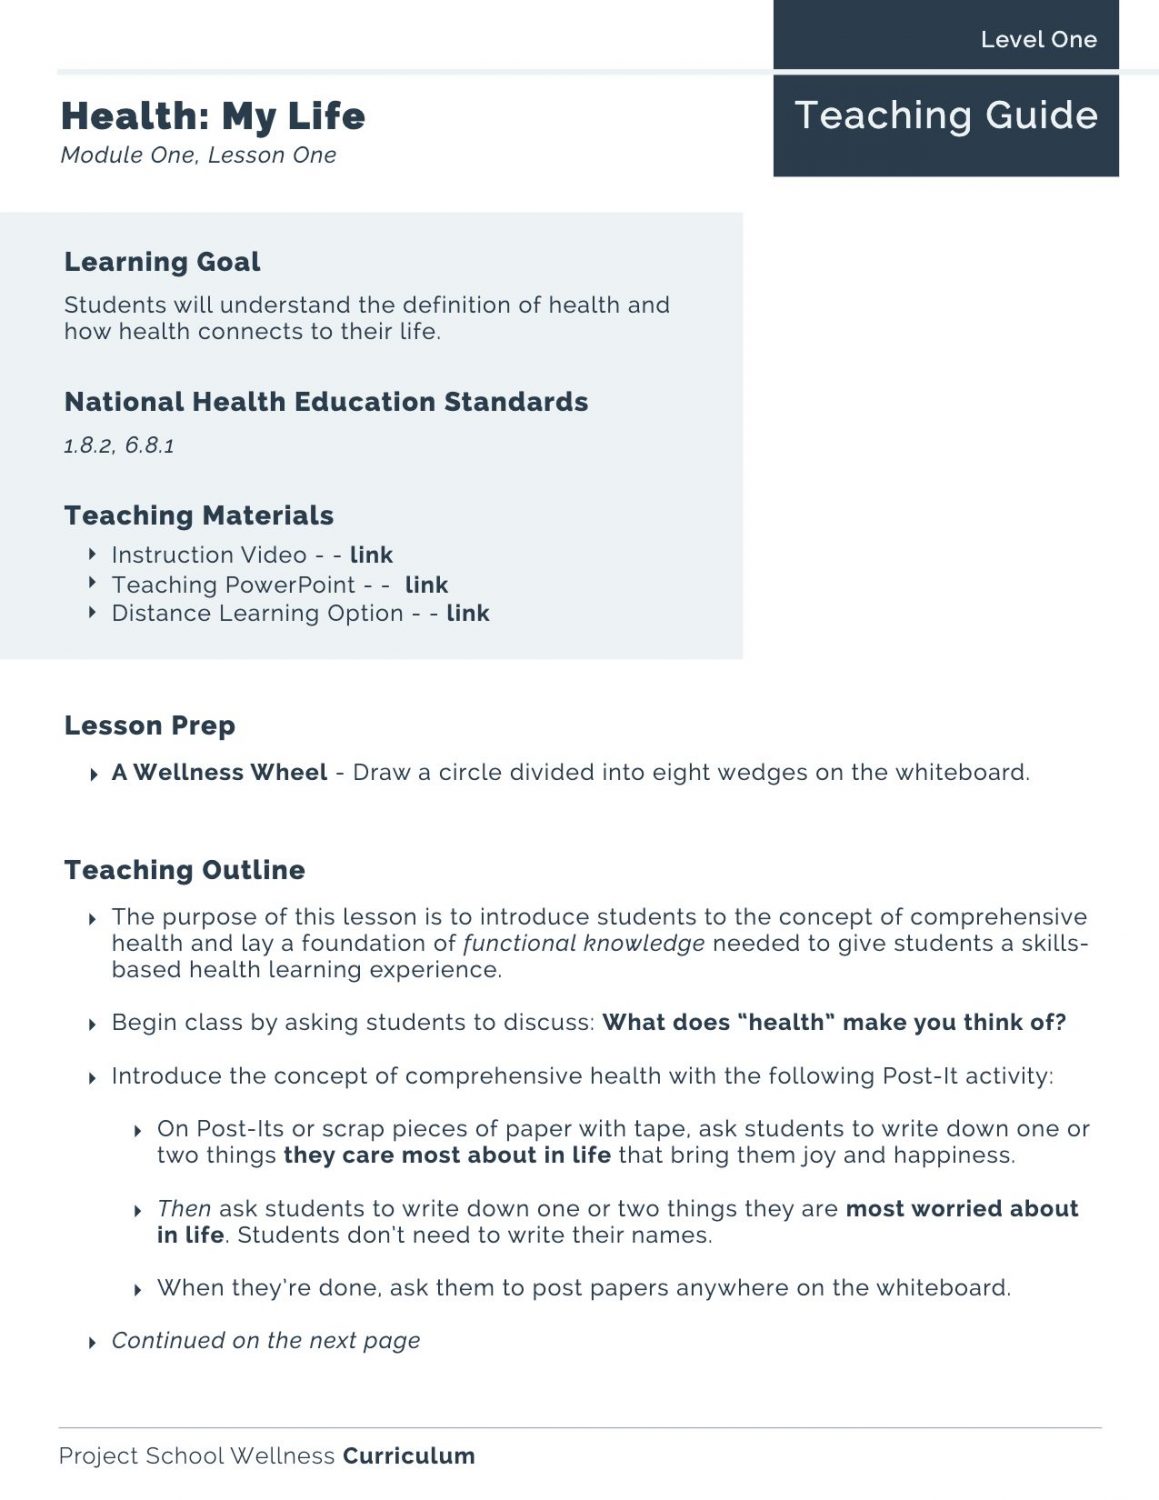 health lesson plans for high school students